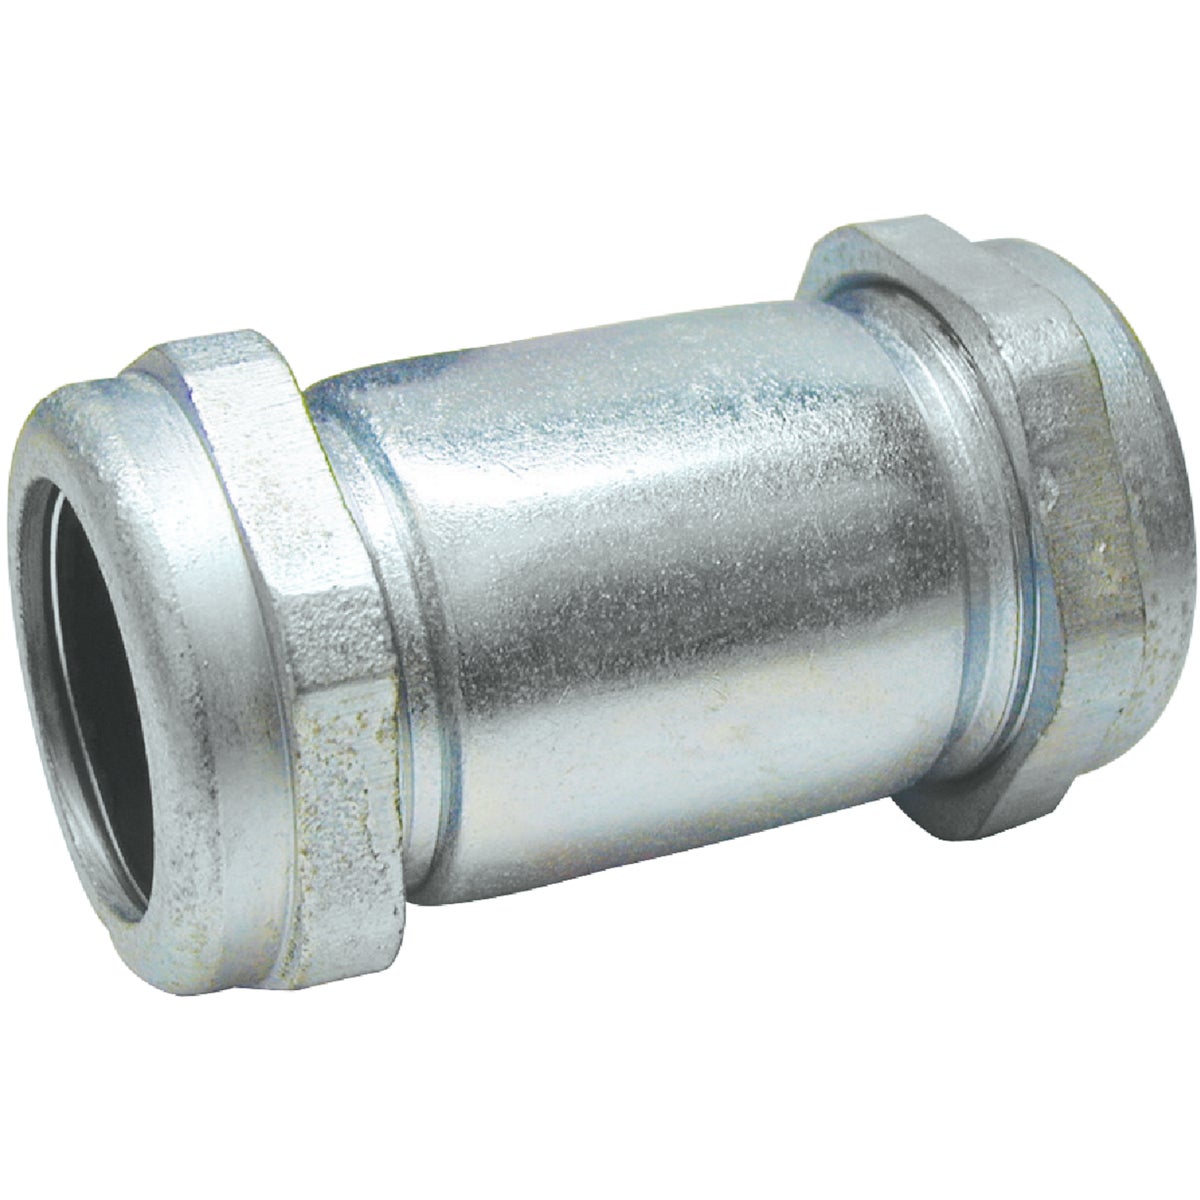 1/2X4 GALV COUPLING